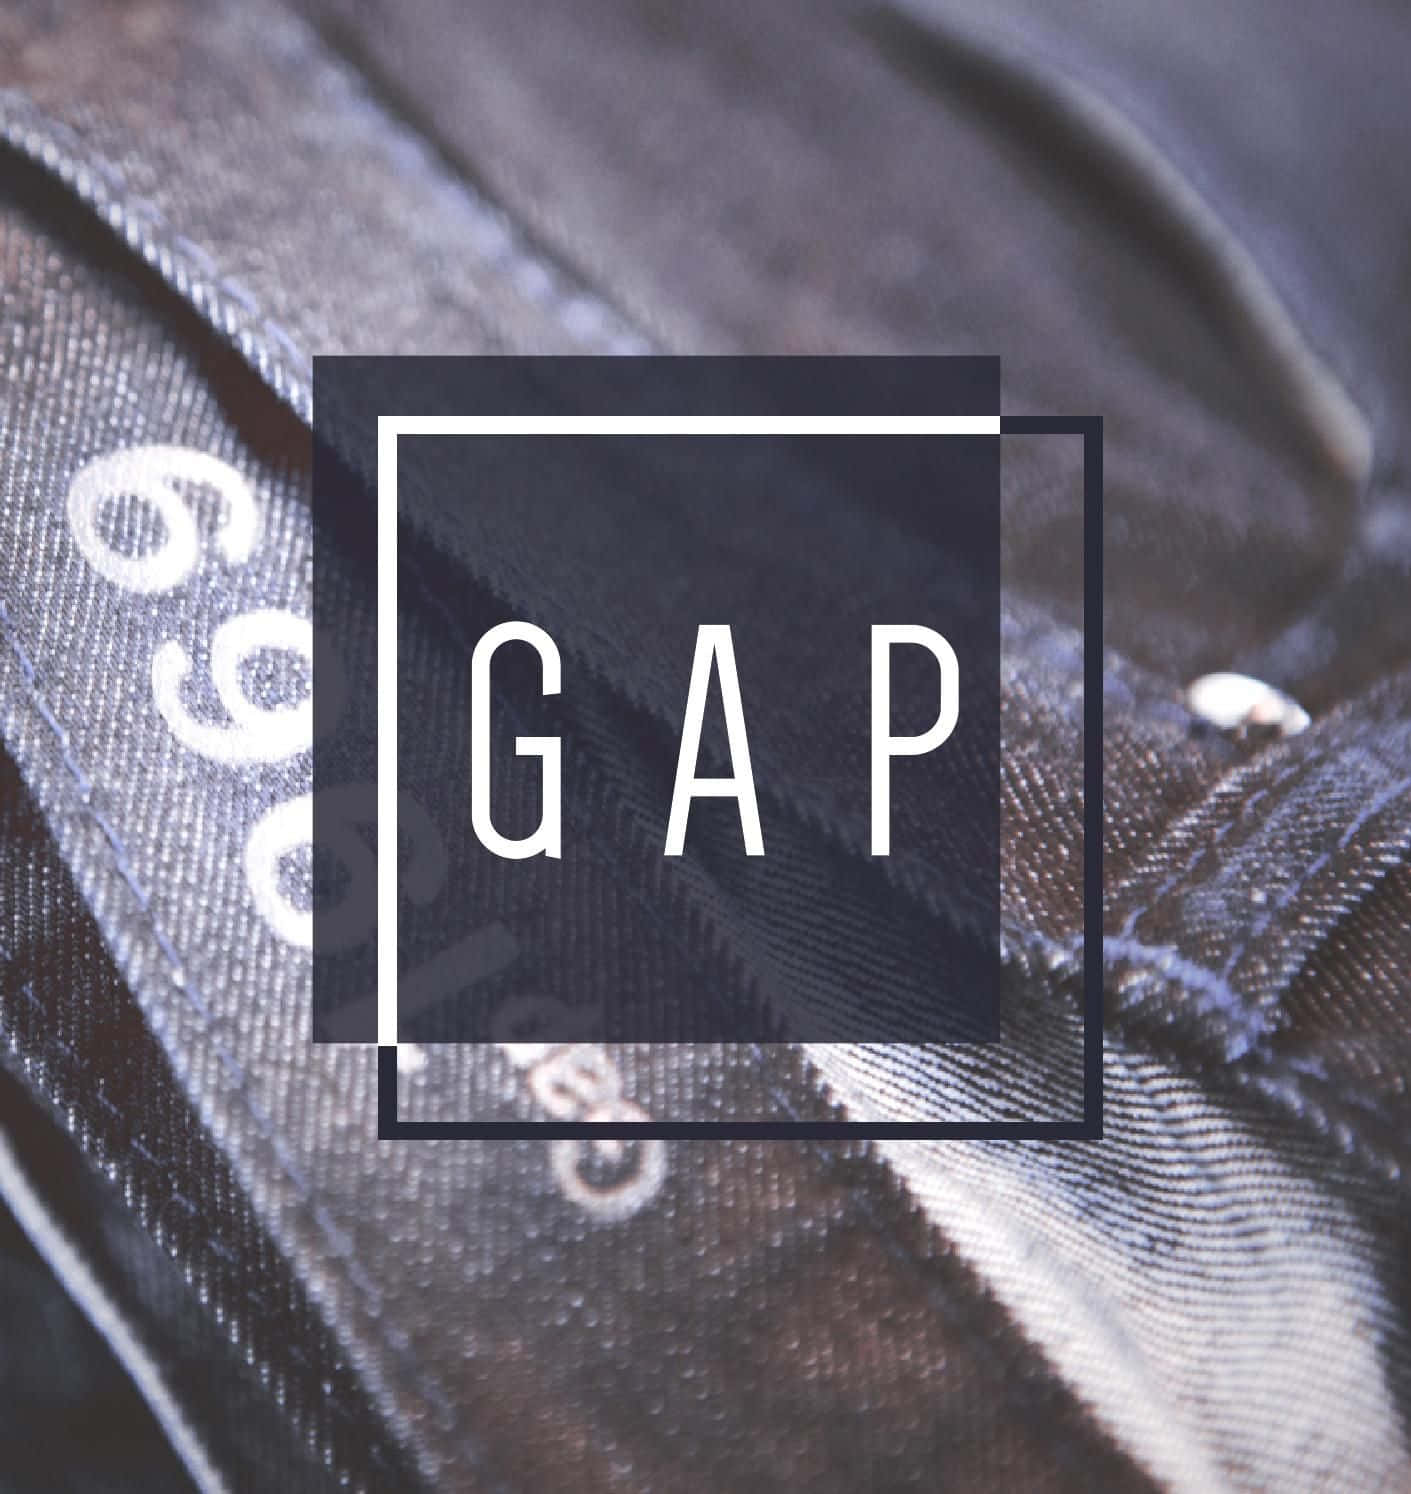 Show Off Your Style with the Latest Gap Collection